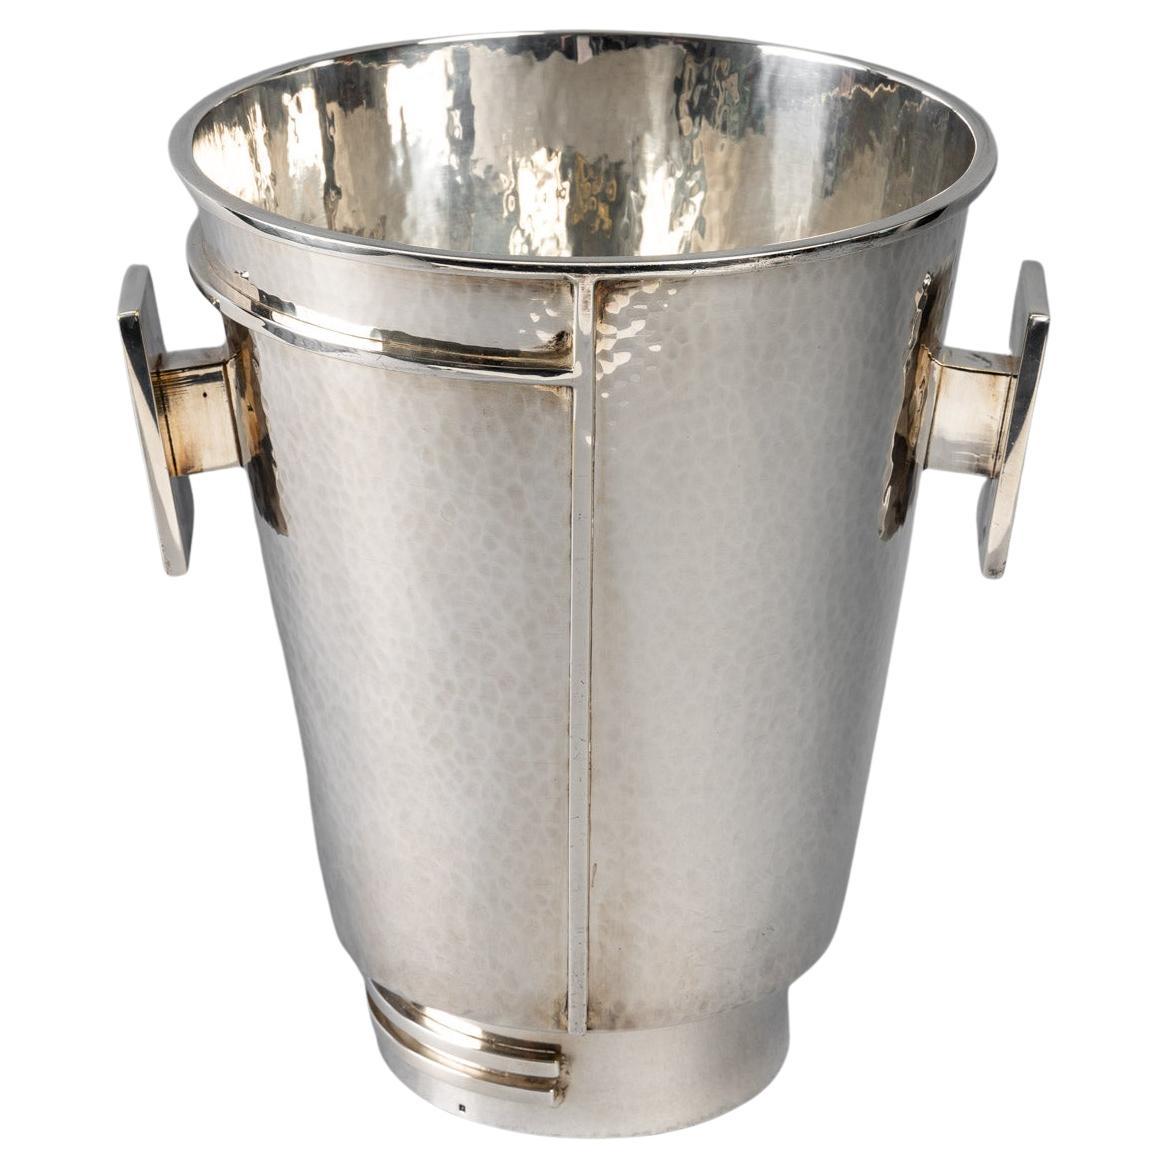 Jean Desprès, Champagne Ice Bucket Modernist Hammered Silver Plated Metal